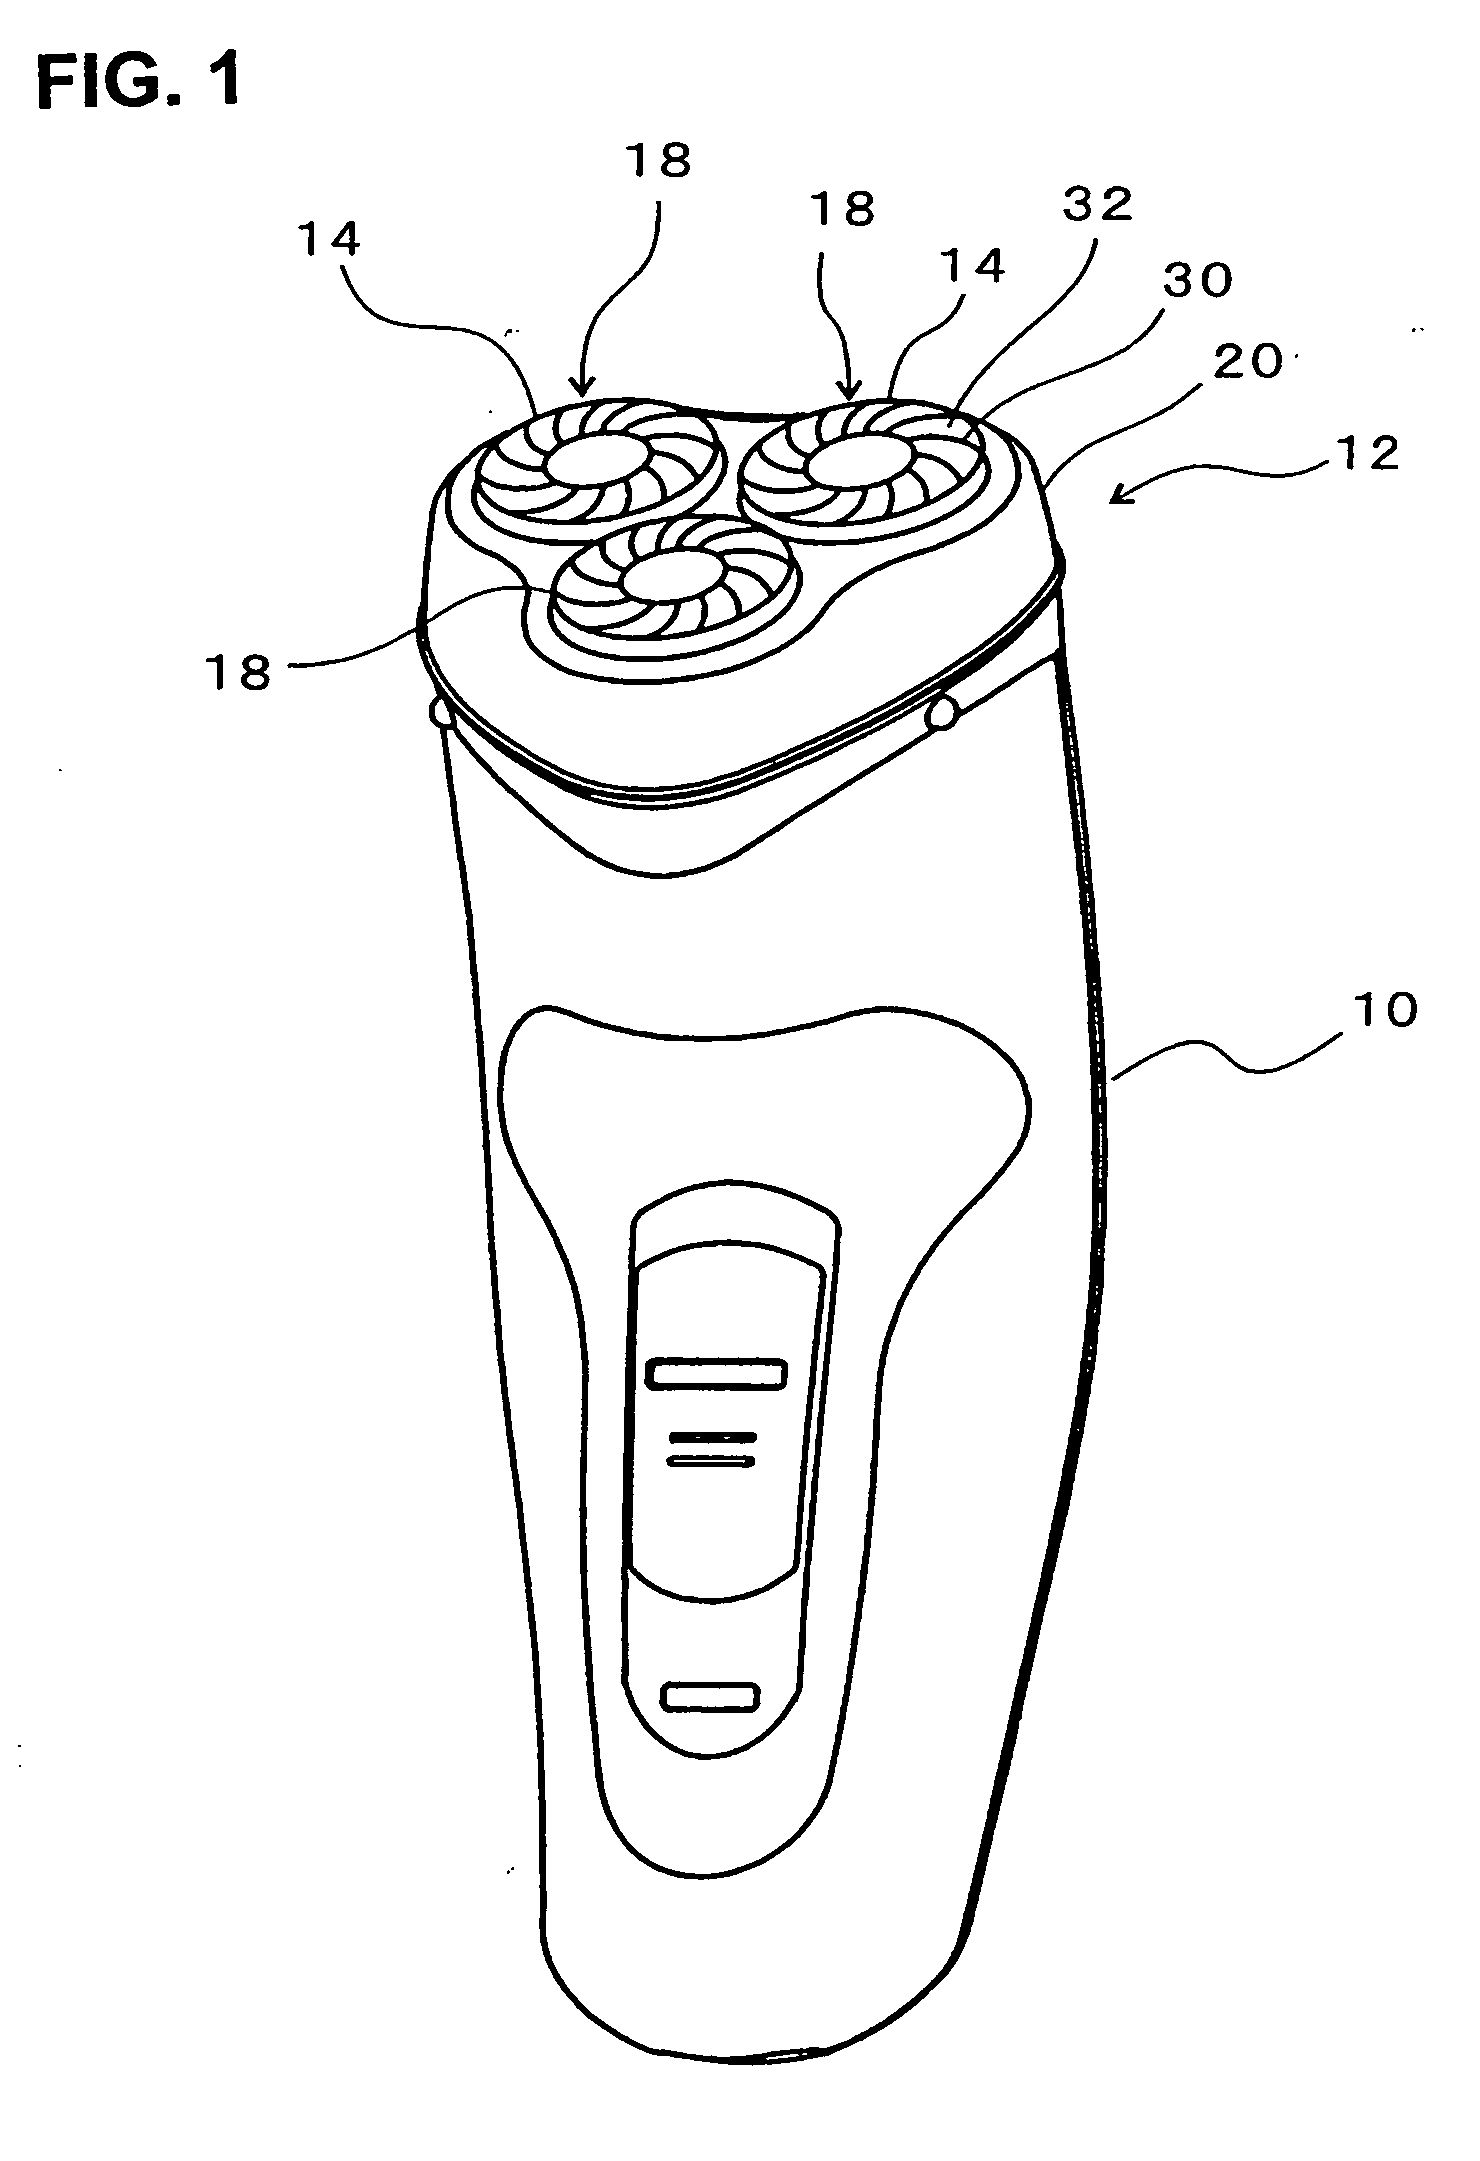 Rotary type electric shaver